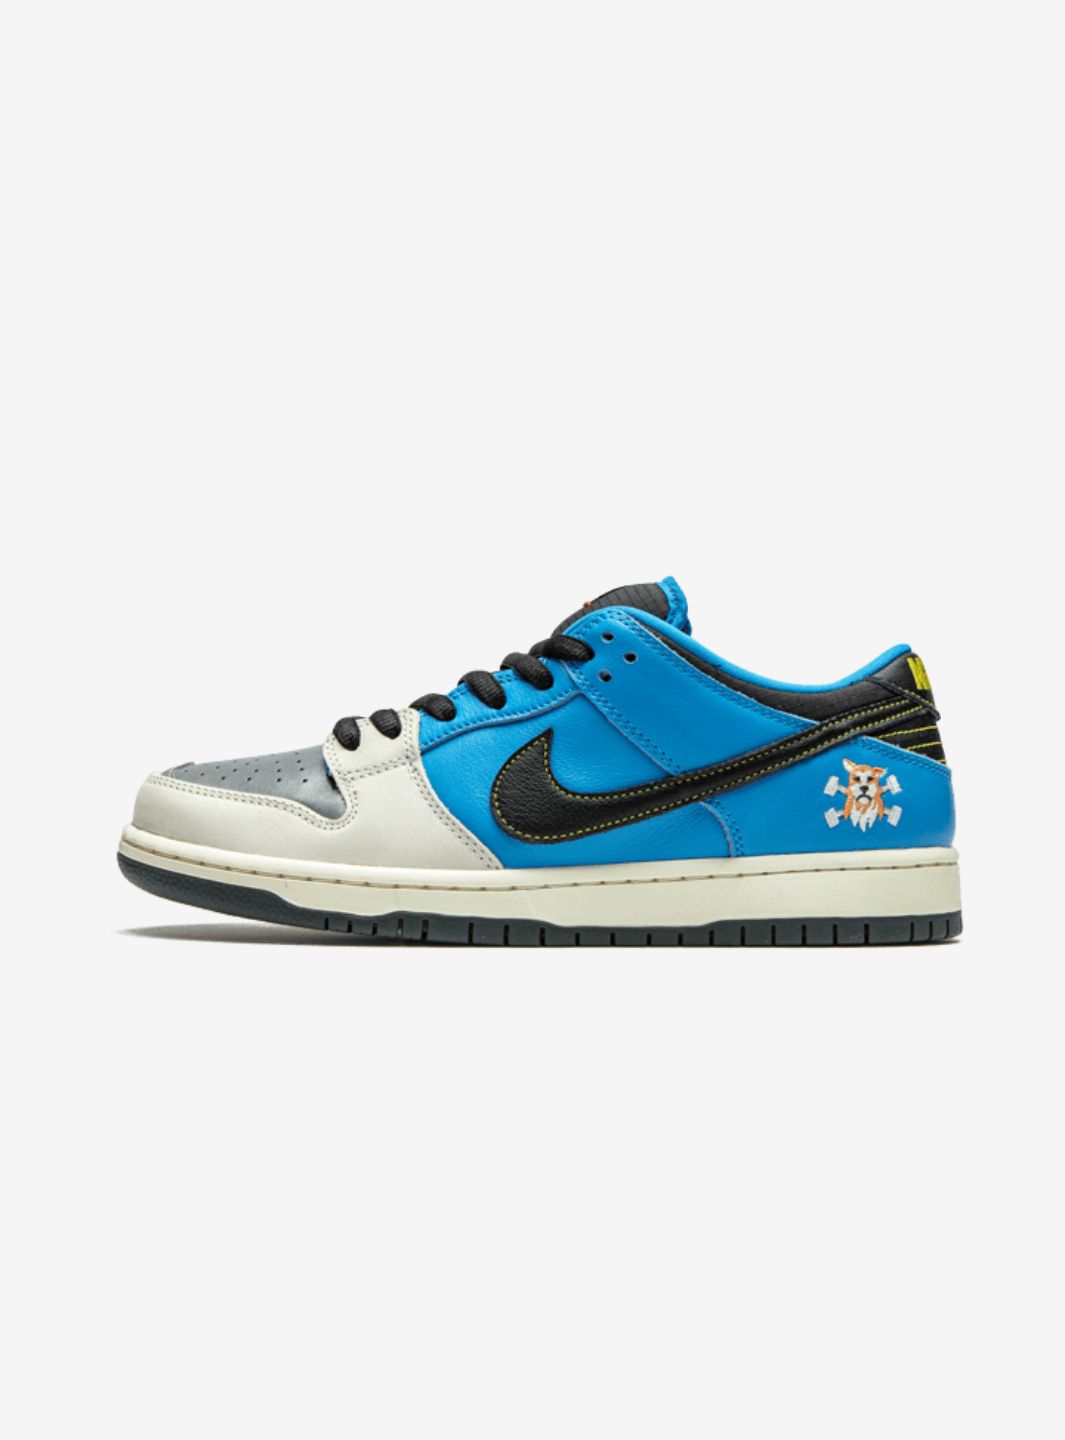 Nike SB Dunk Low Instant Skateboards - CZ5128-400 | ResellZone